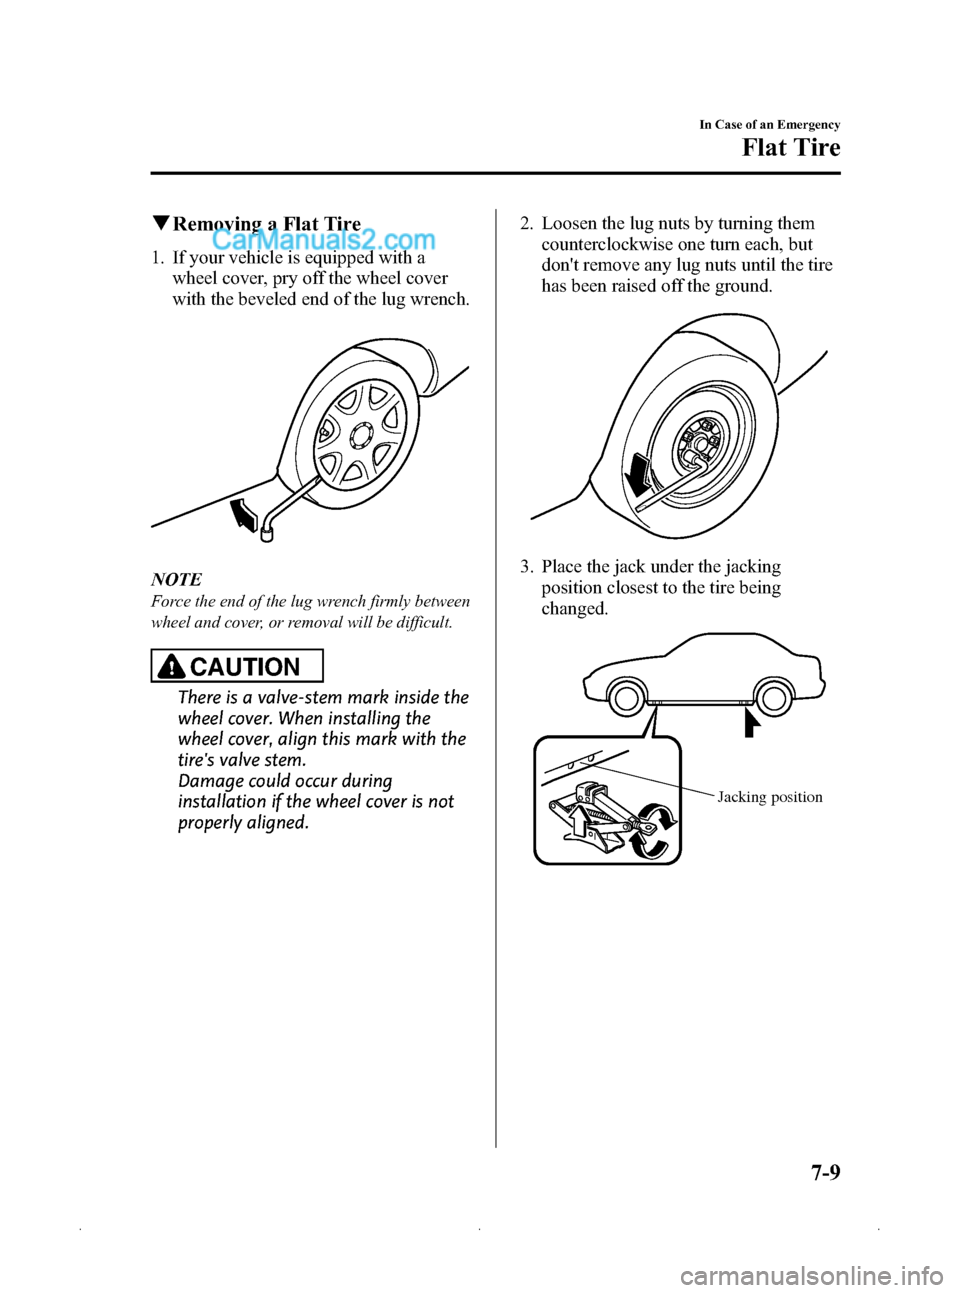 MAZDA MODEL MAZDASPEED 3 2009  Owners Manual (in English) Black plate (271,1)
qRemoving a Flat Tire
1. If your vehicle is equipped with a
wheel cover, pry off the wheel cover
with the beveled end of the lug wrench.
NOTE
Force the end of the lug wrench firmly